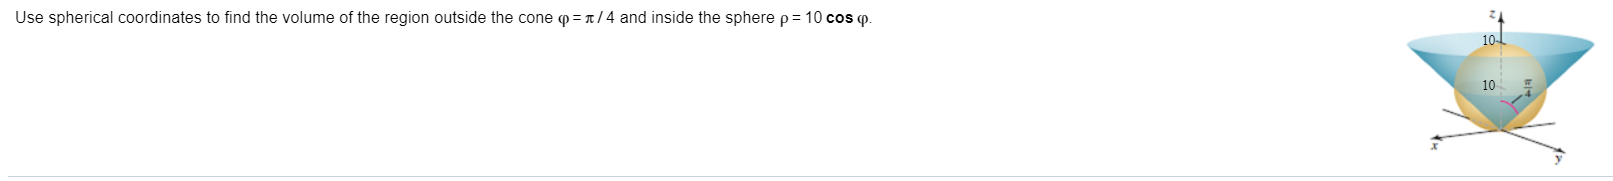 Use spherical coordinates to find the volume of the region outside the cone p = t / 4 and inside the sphere p= 10 cos p.
10-
10
